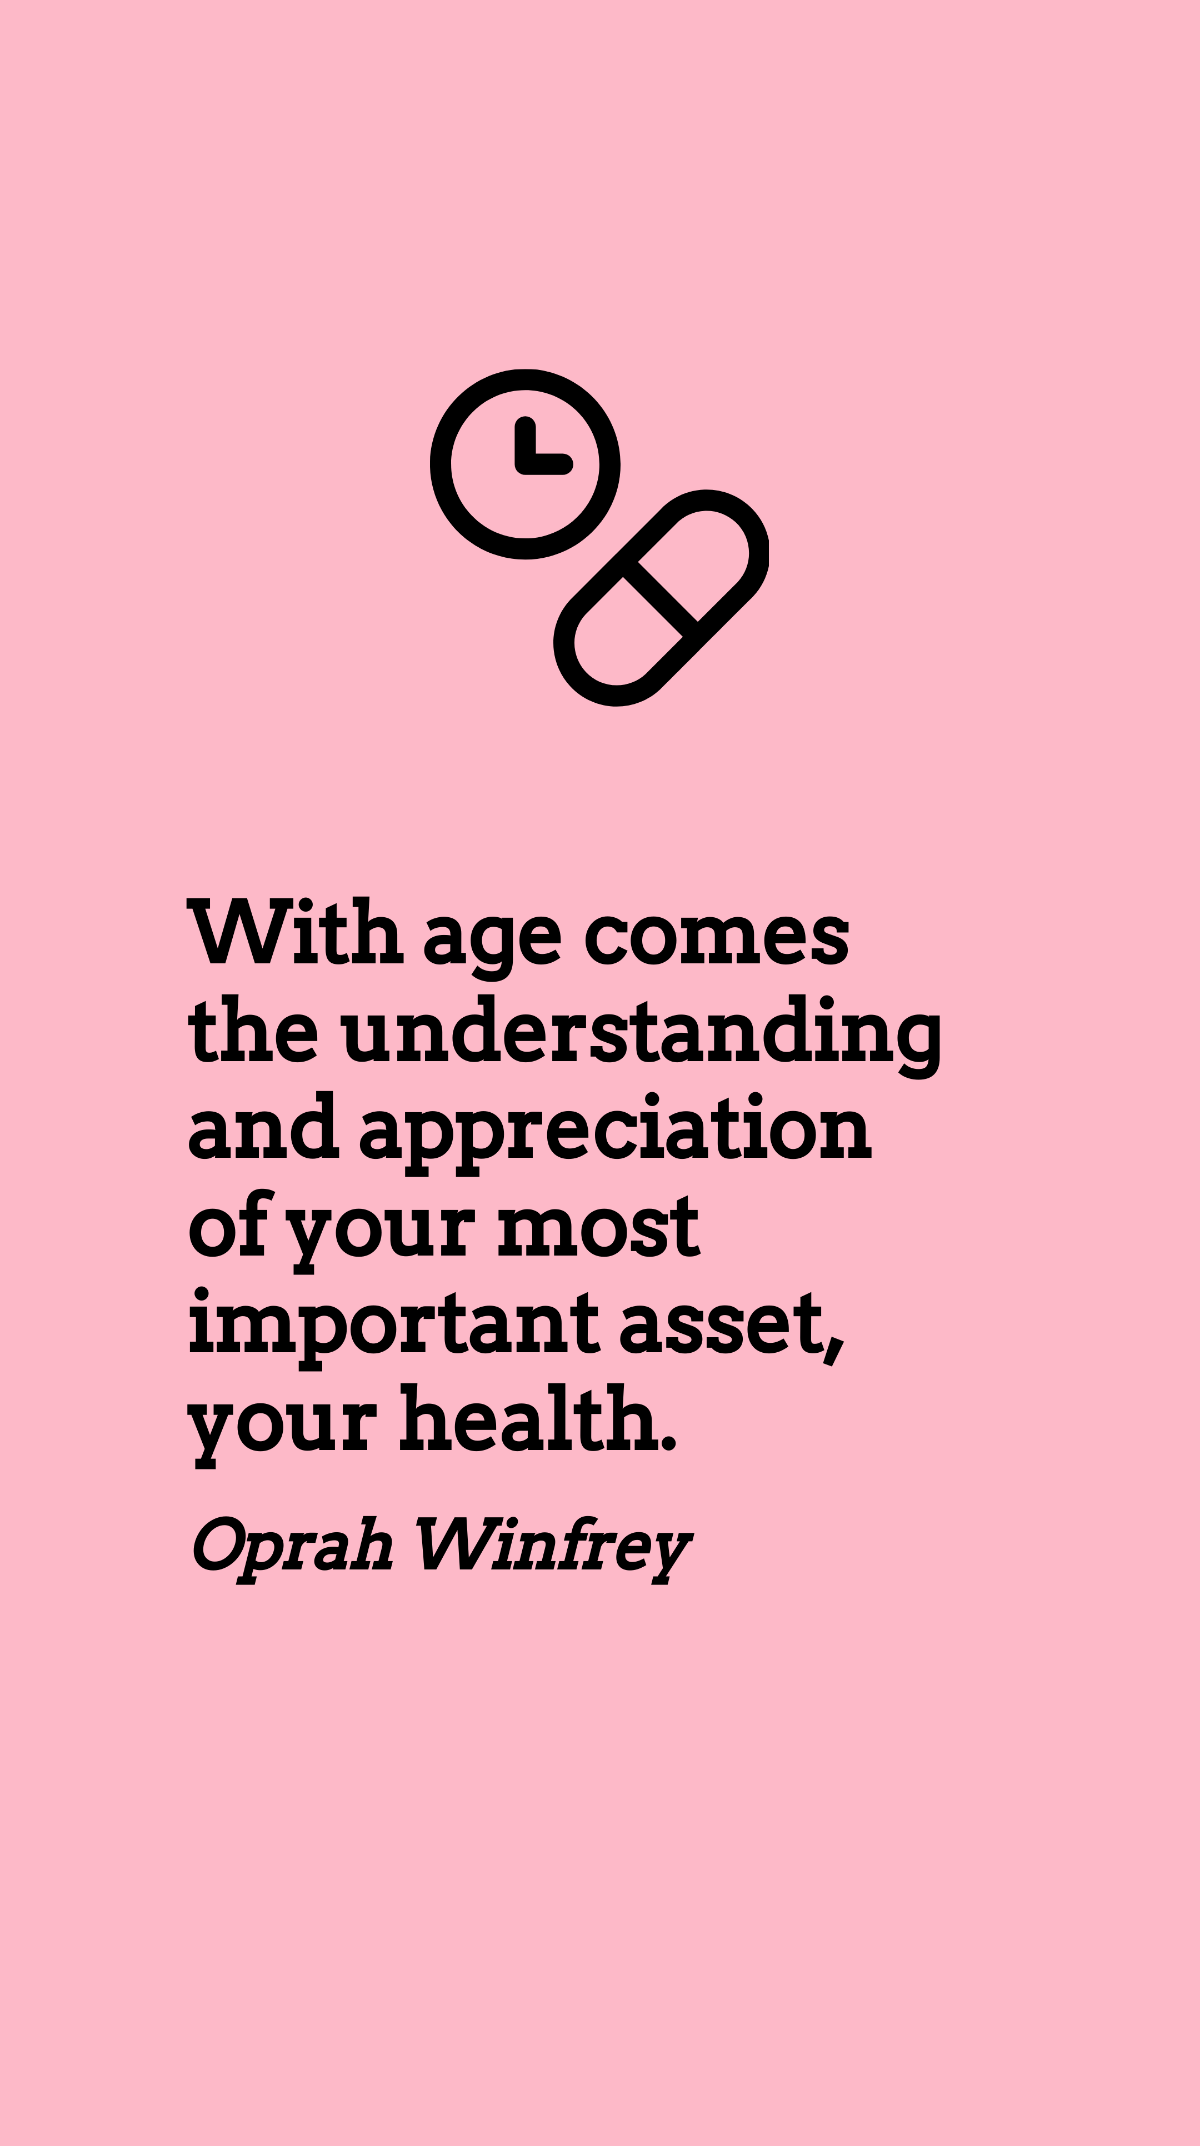 Oprah Winfrey - With age comes the understanding and appreciation of your most important asset, your health. Template